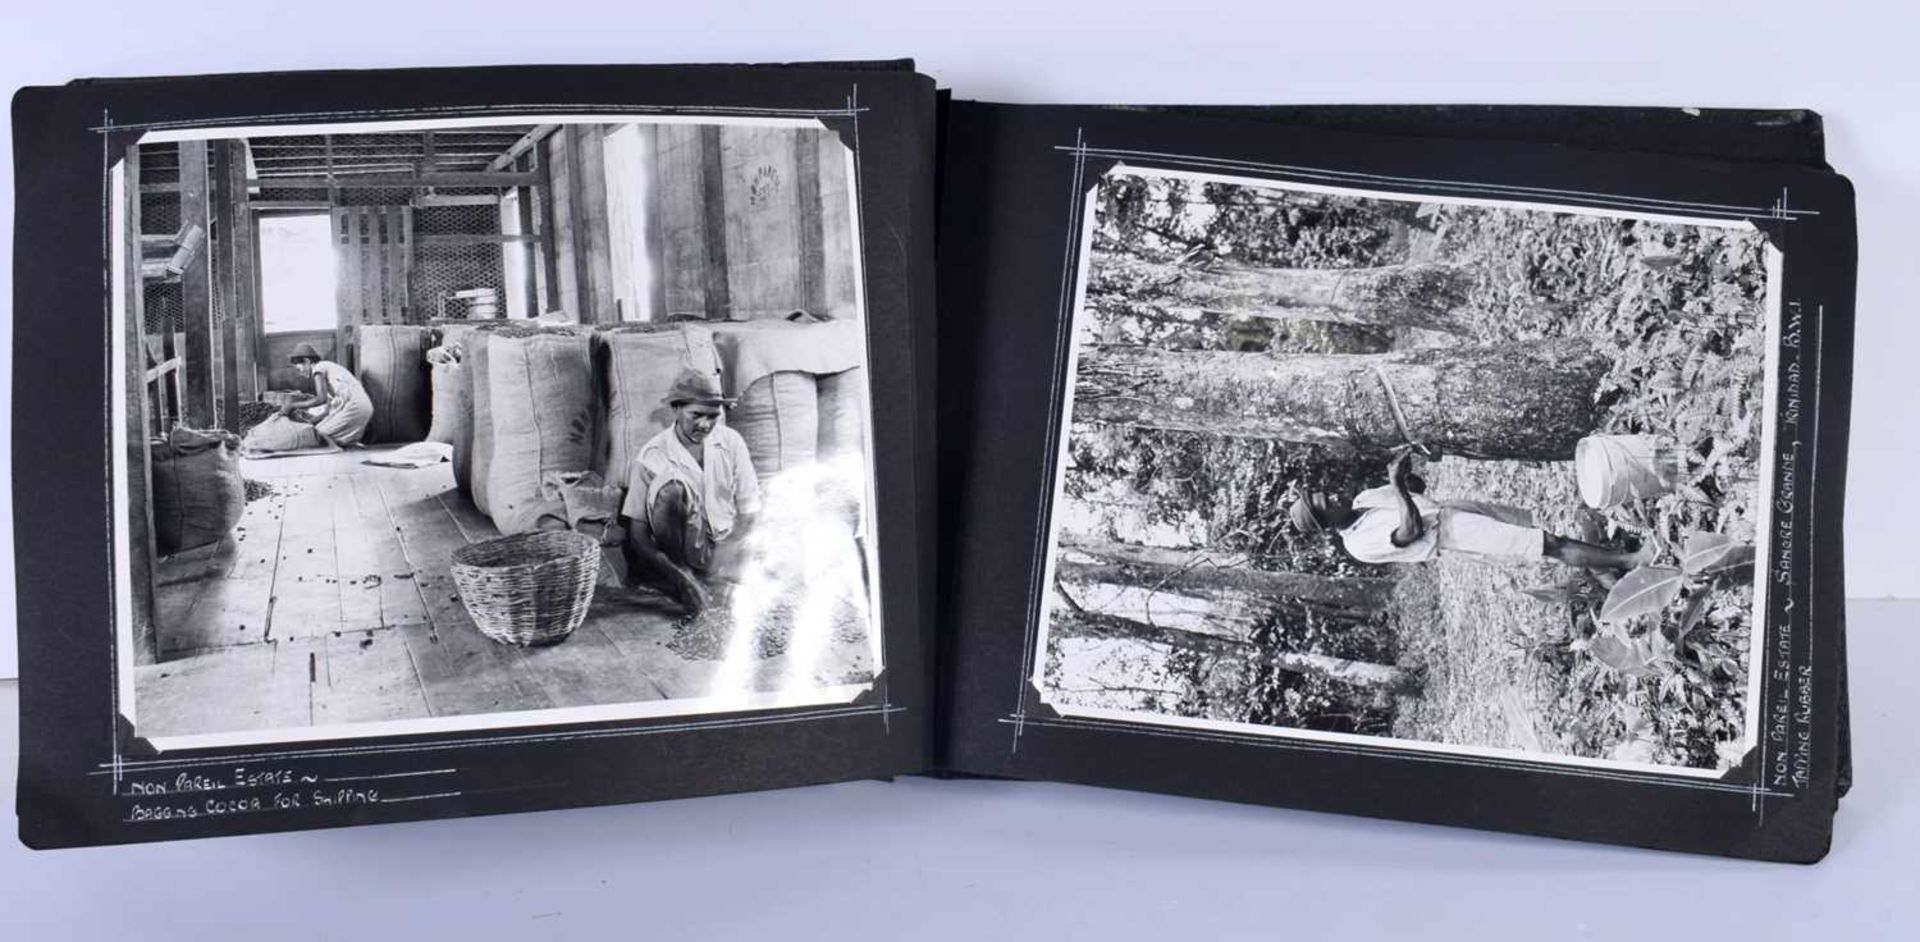 A Historic collection of 60 photographs in Albums each 20 x 25 cm, Agriculture on plantations in - Image 4 of 10